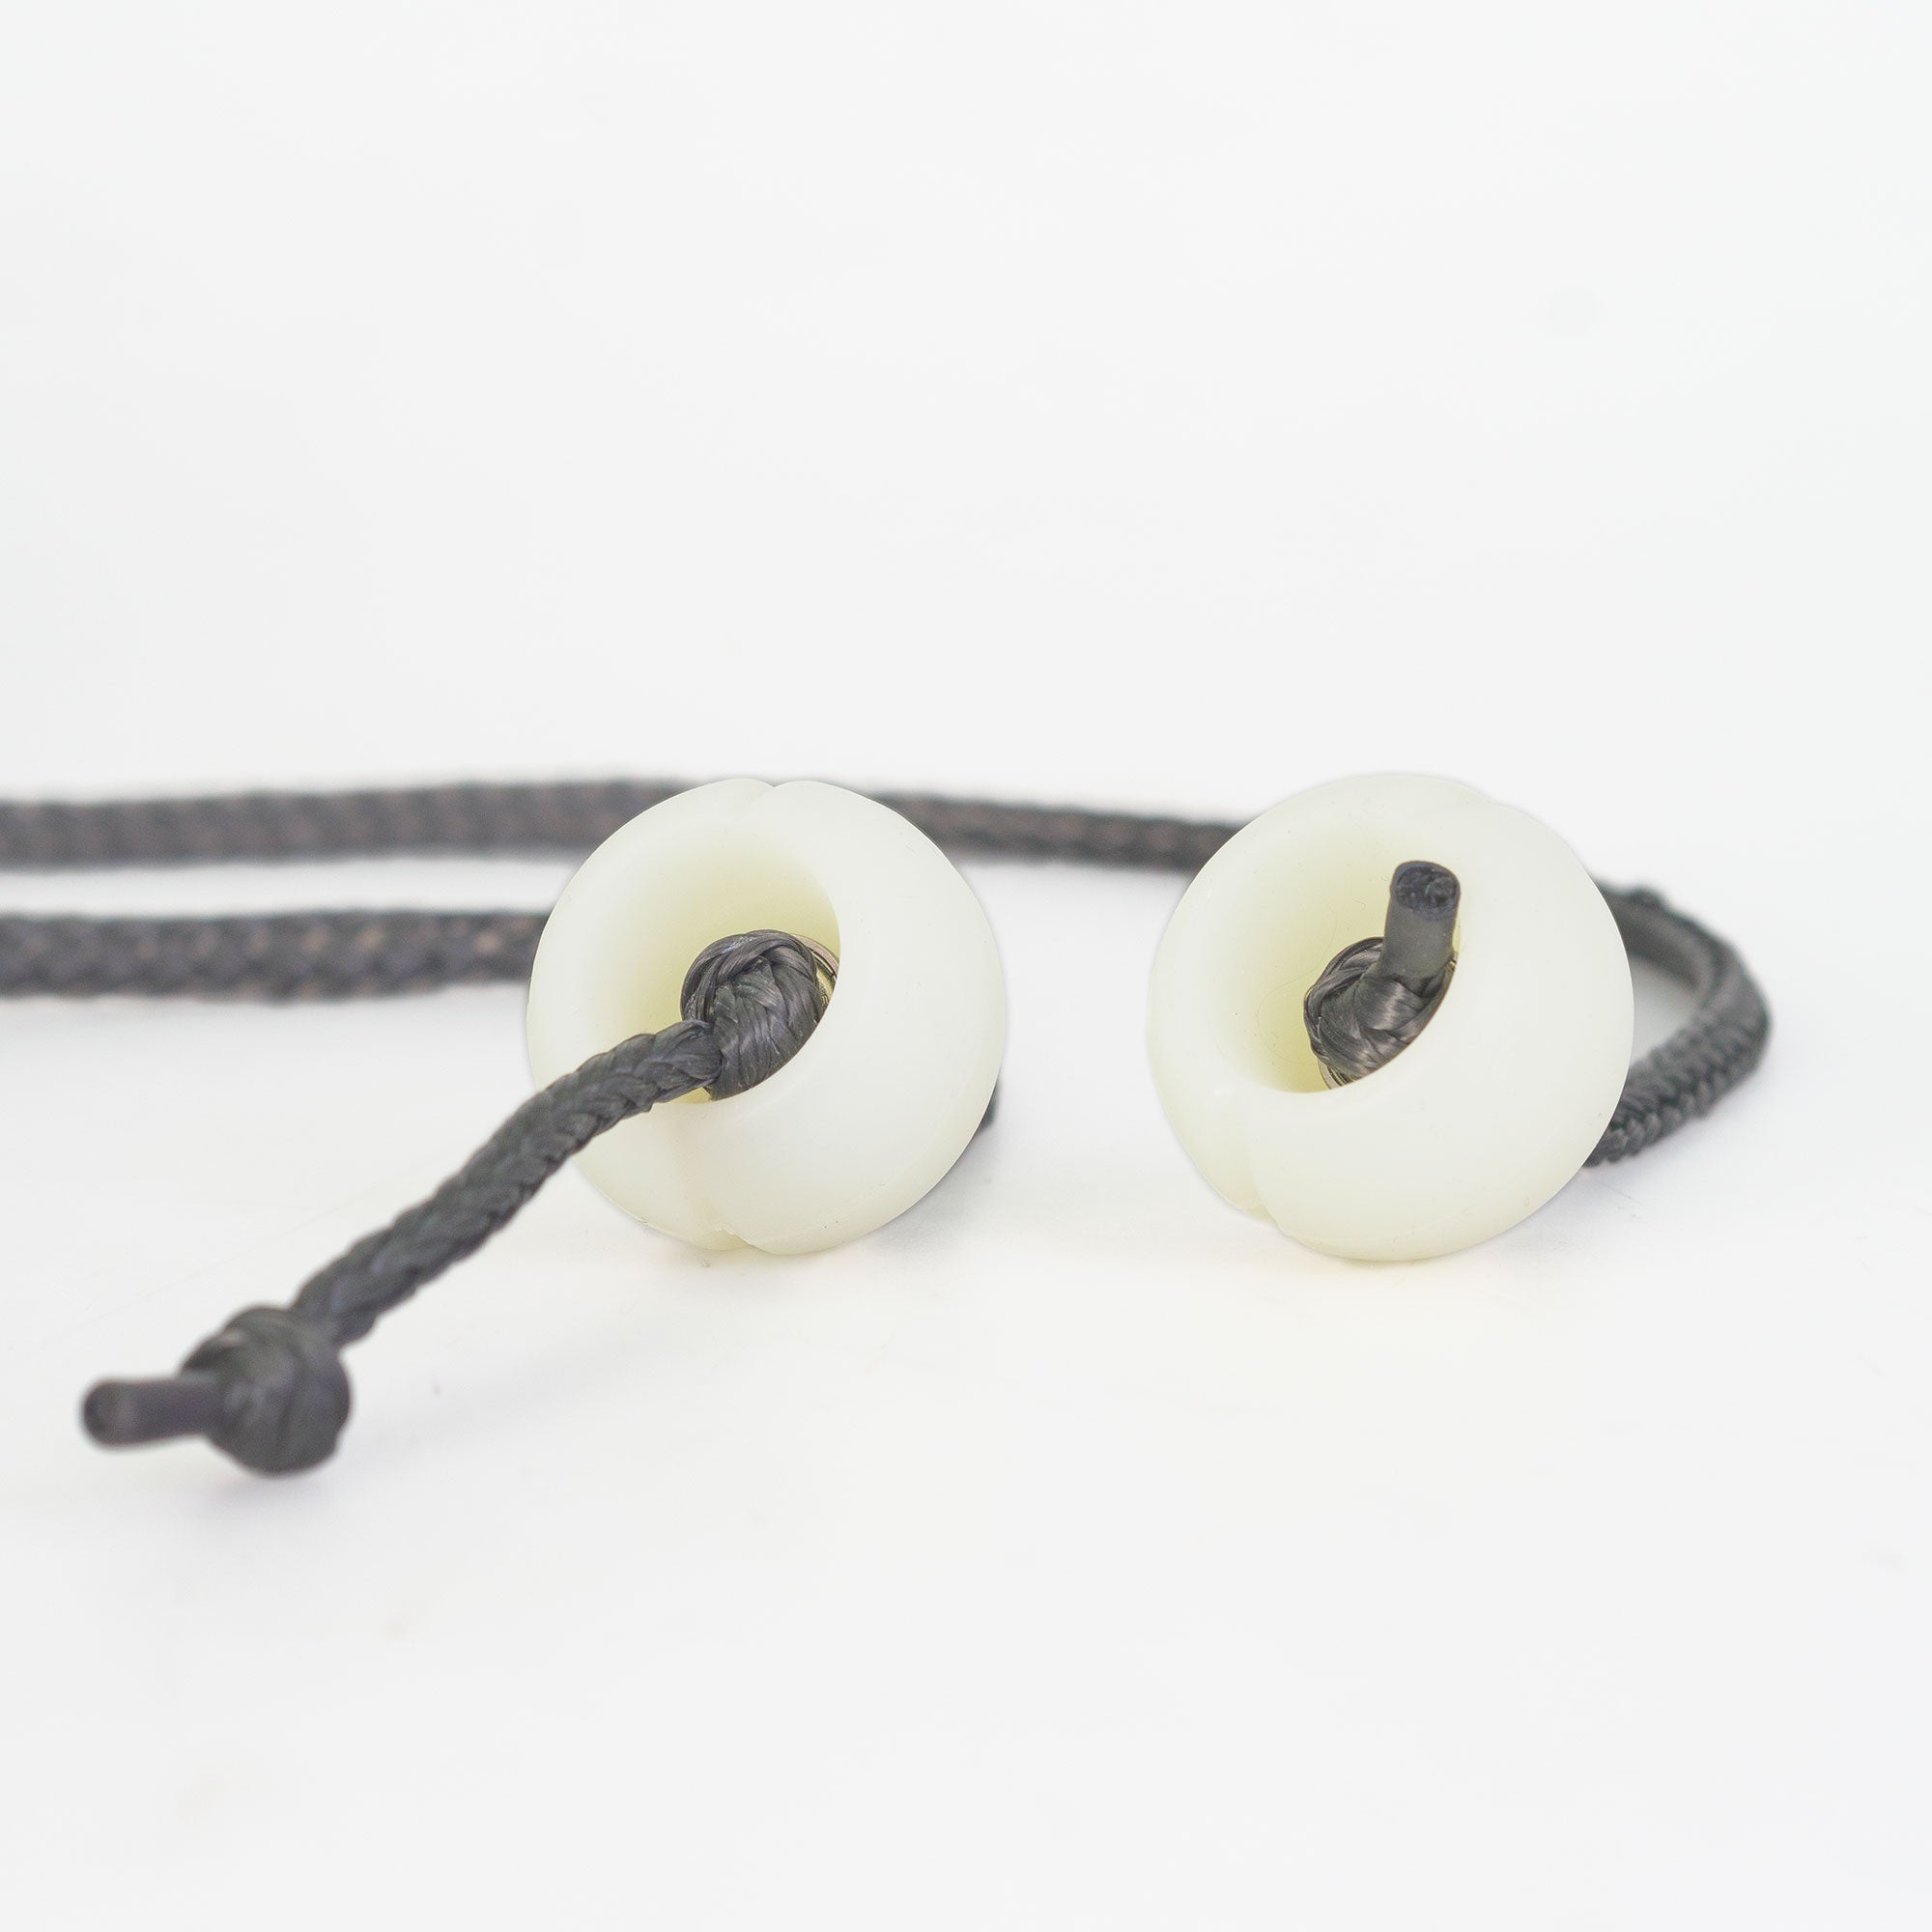 Close up of Silicone poi handles attached to cord